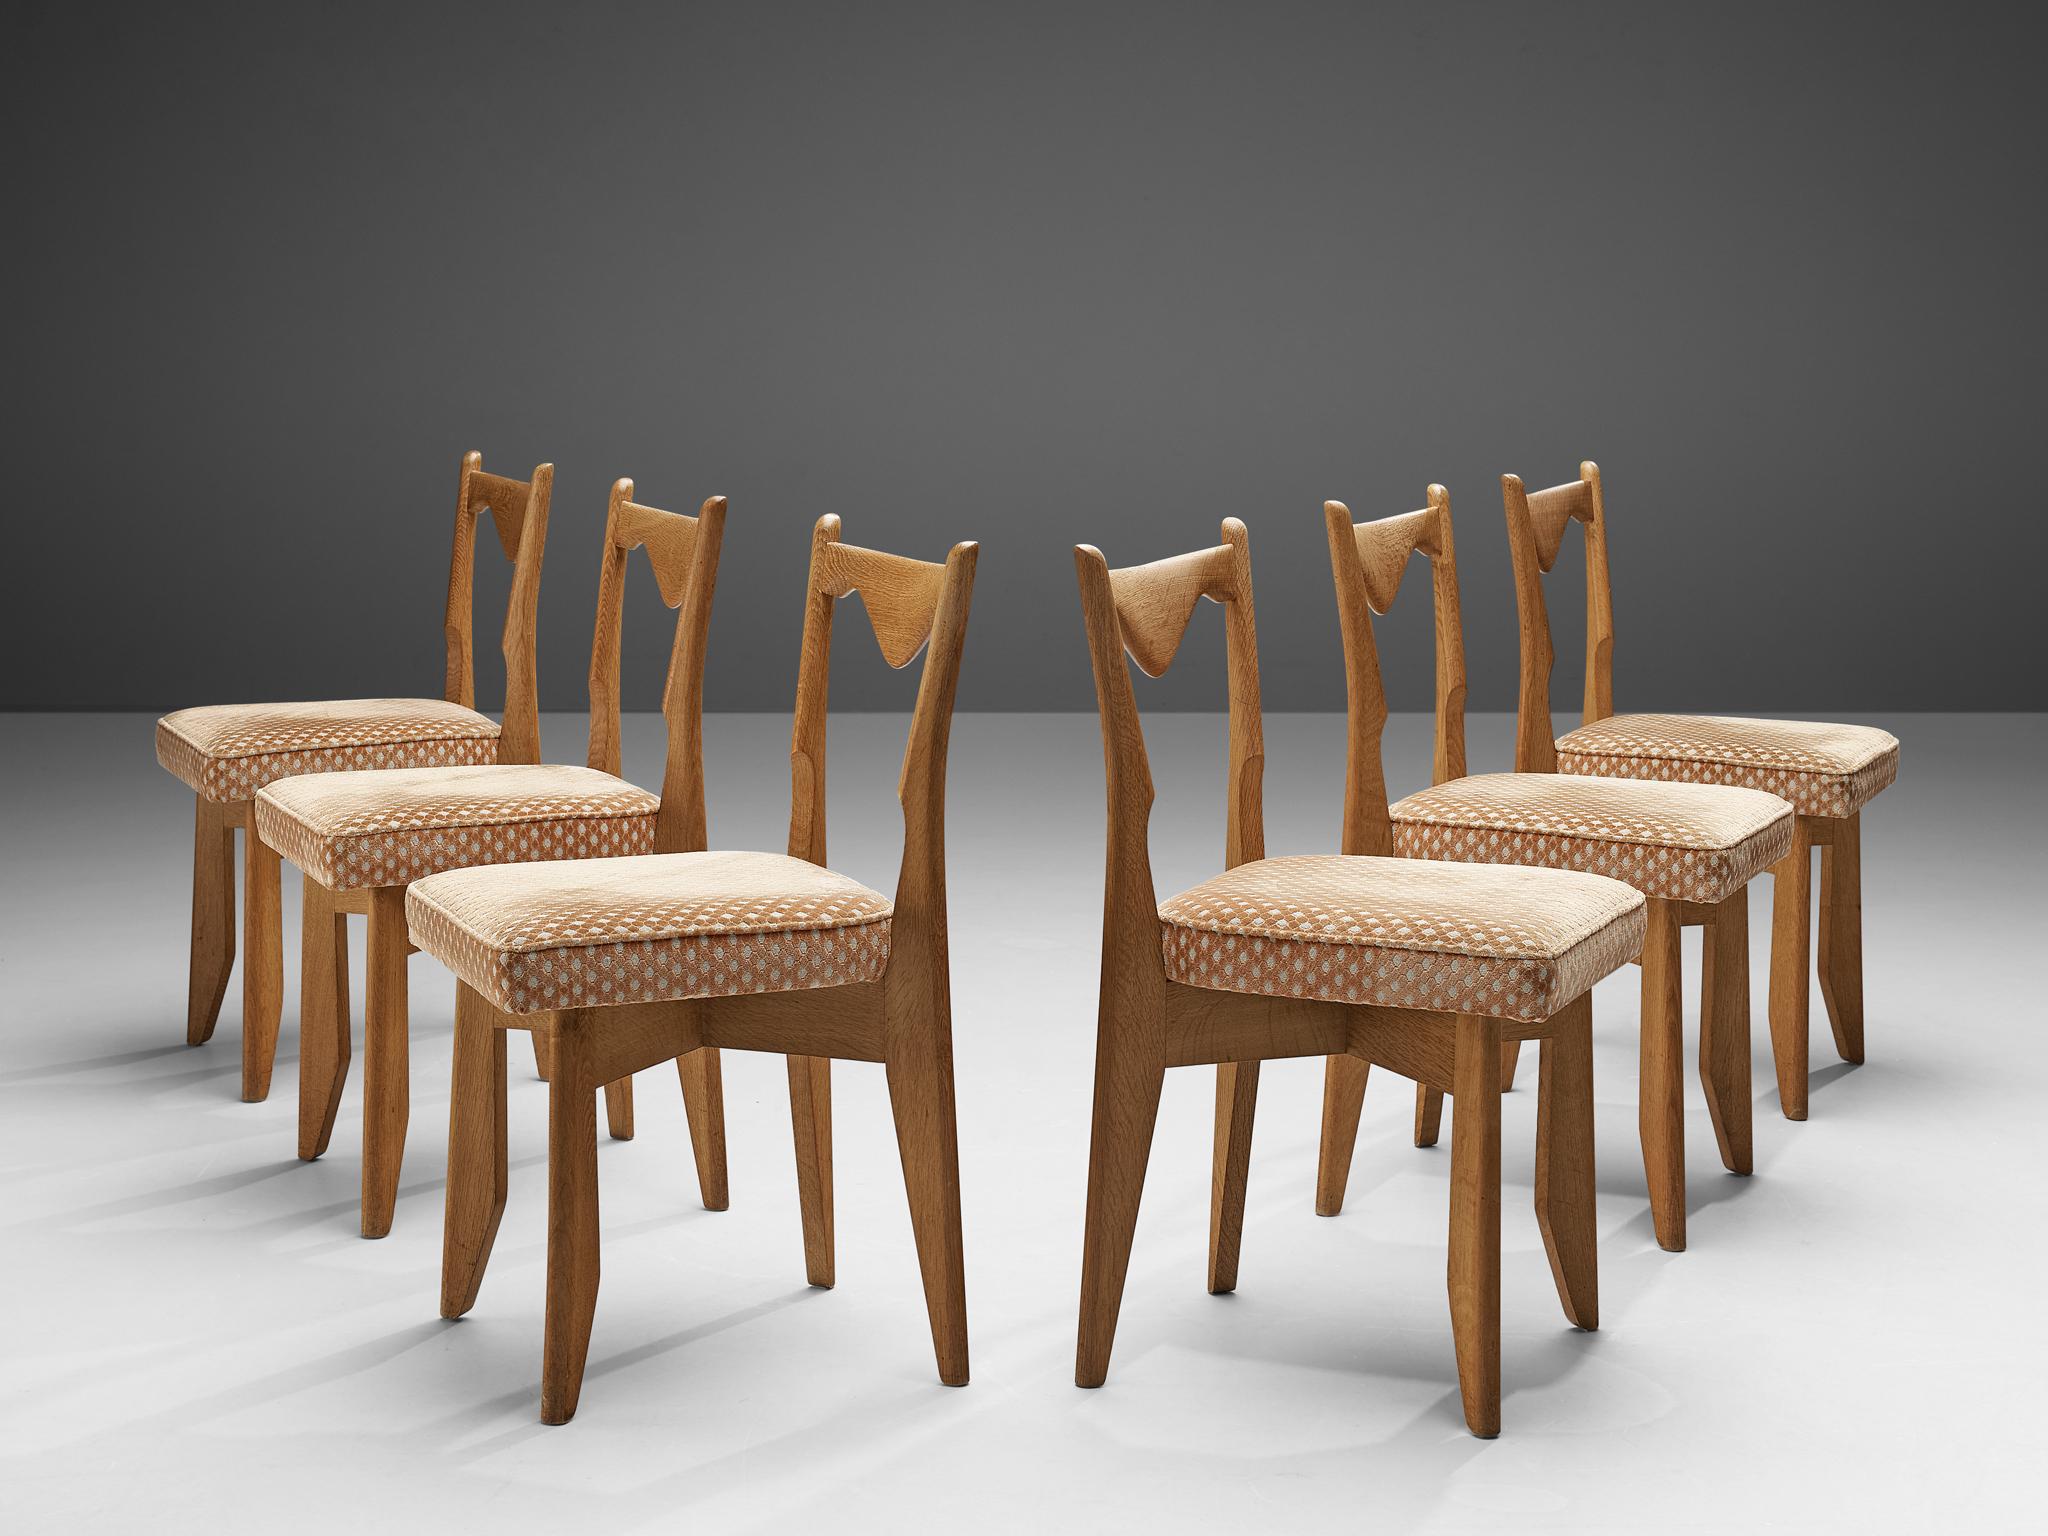 Guillerme et Chambron, set of six dining chairs, oak, France, 1960s

Set of six dining chairs in solid oak by Guillerme and Chambron. These chairs show the characteristic frame of this French designer duo. They feature sturdy and tapered legs and a